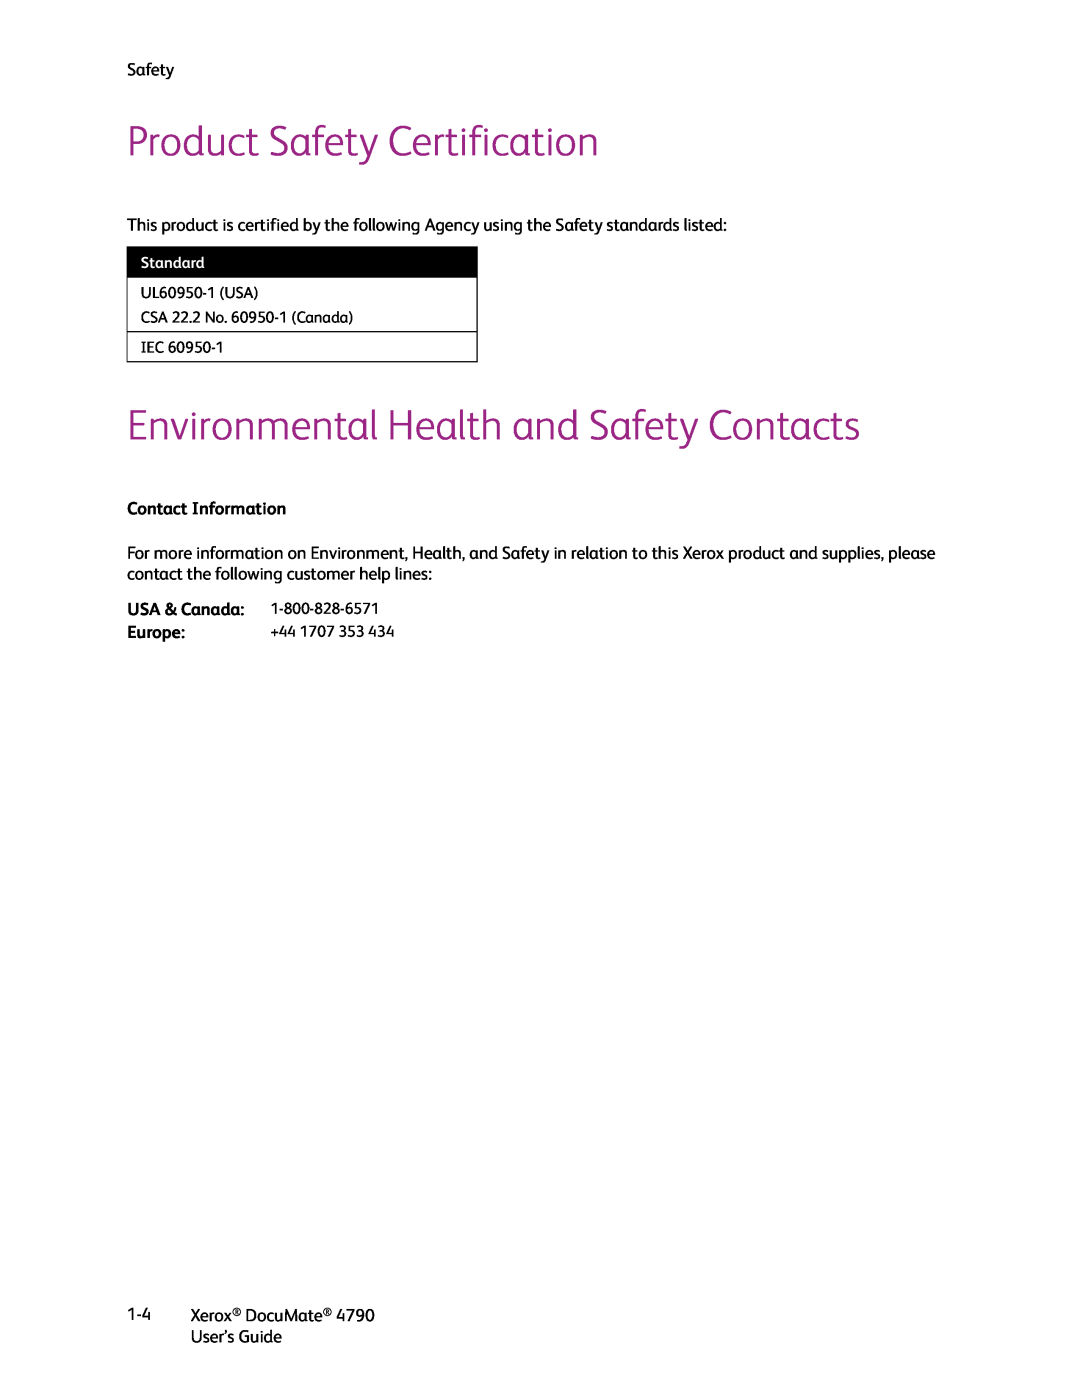 Xerox xerox documate Product Safety Certification, Environmental Health and Safety Contacts, Contact Information, Europe 